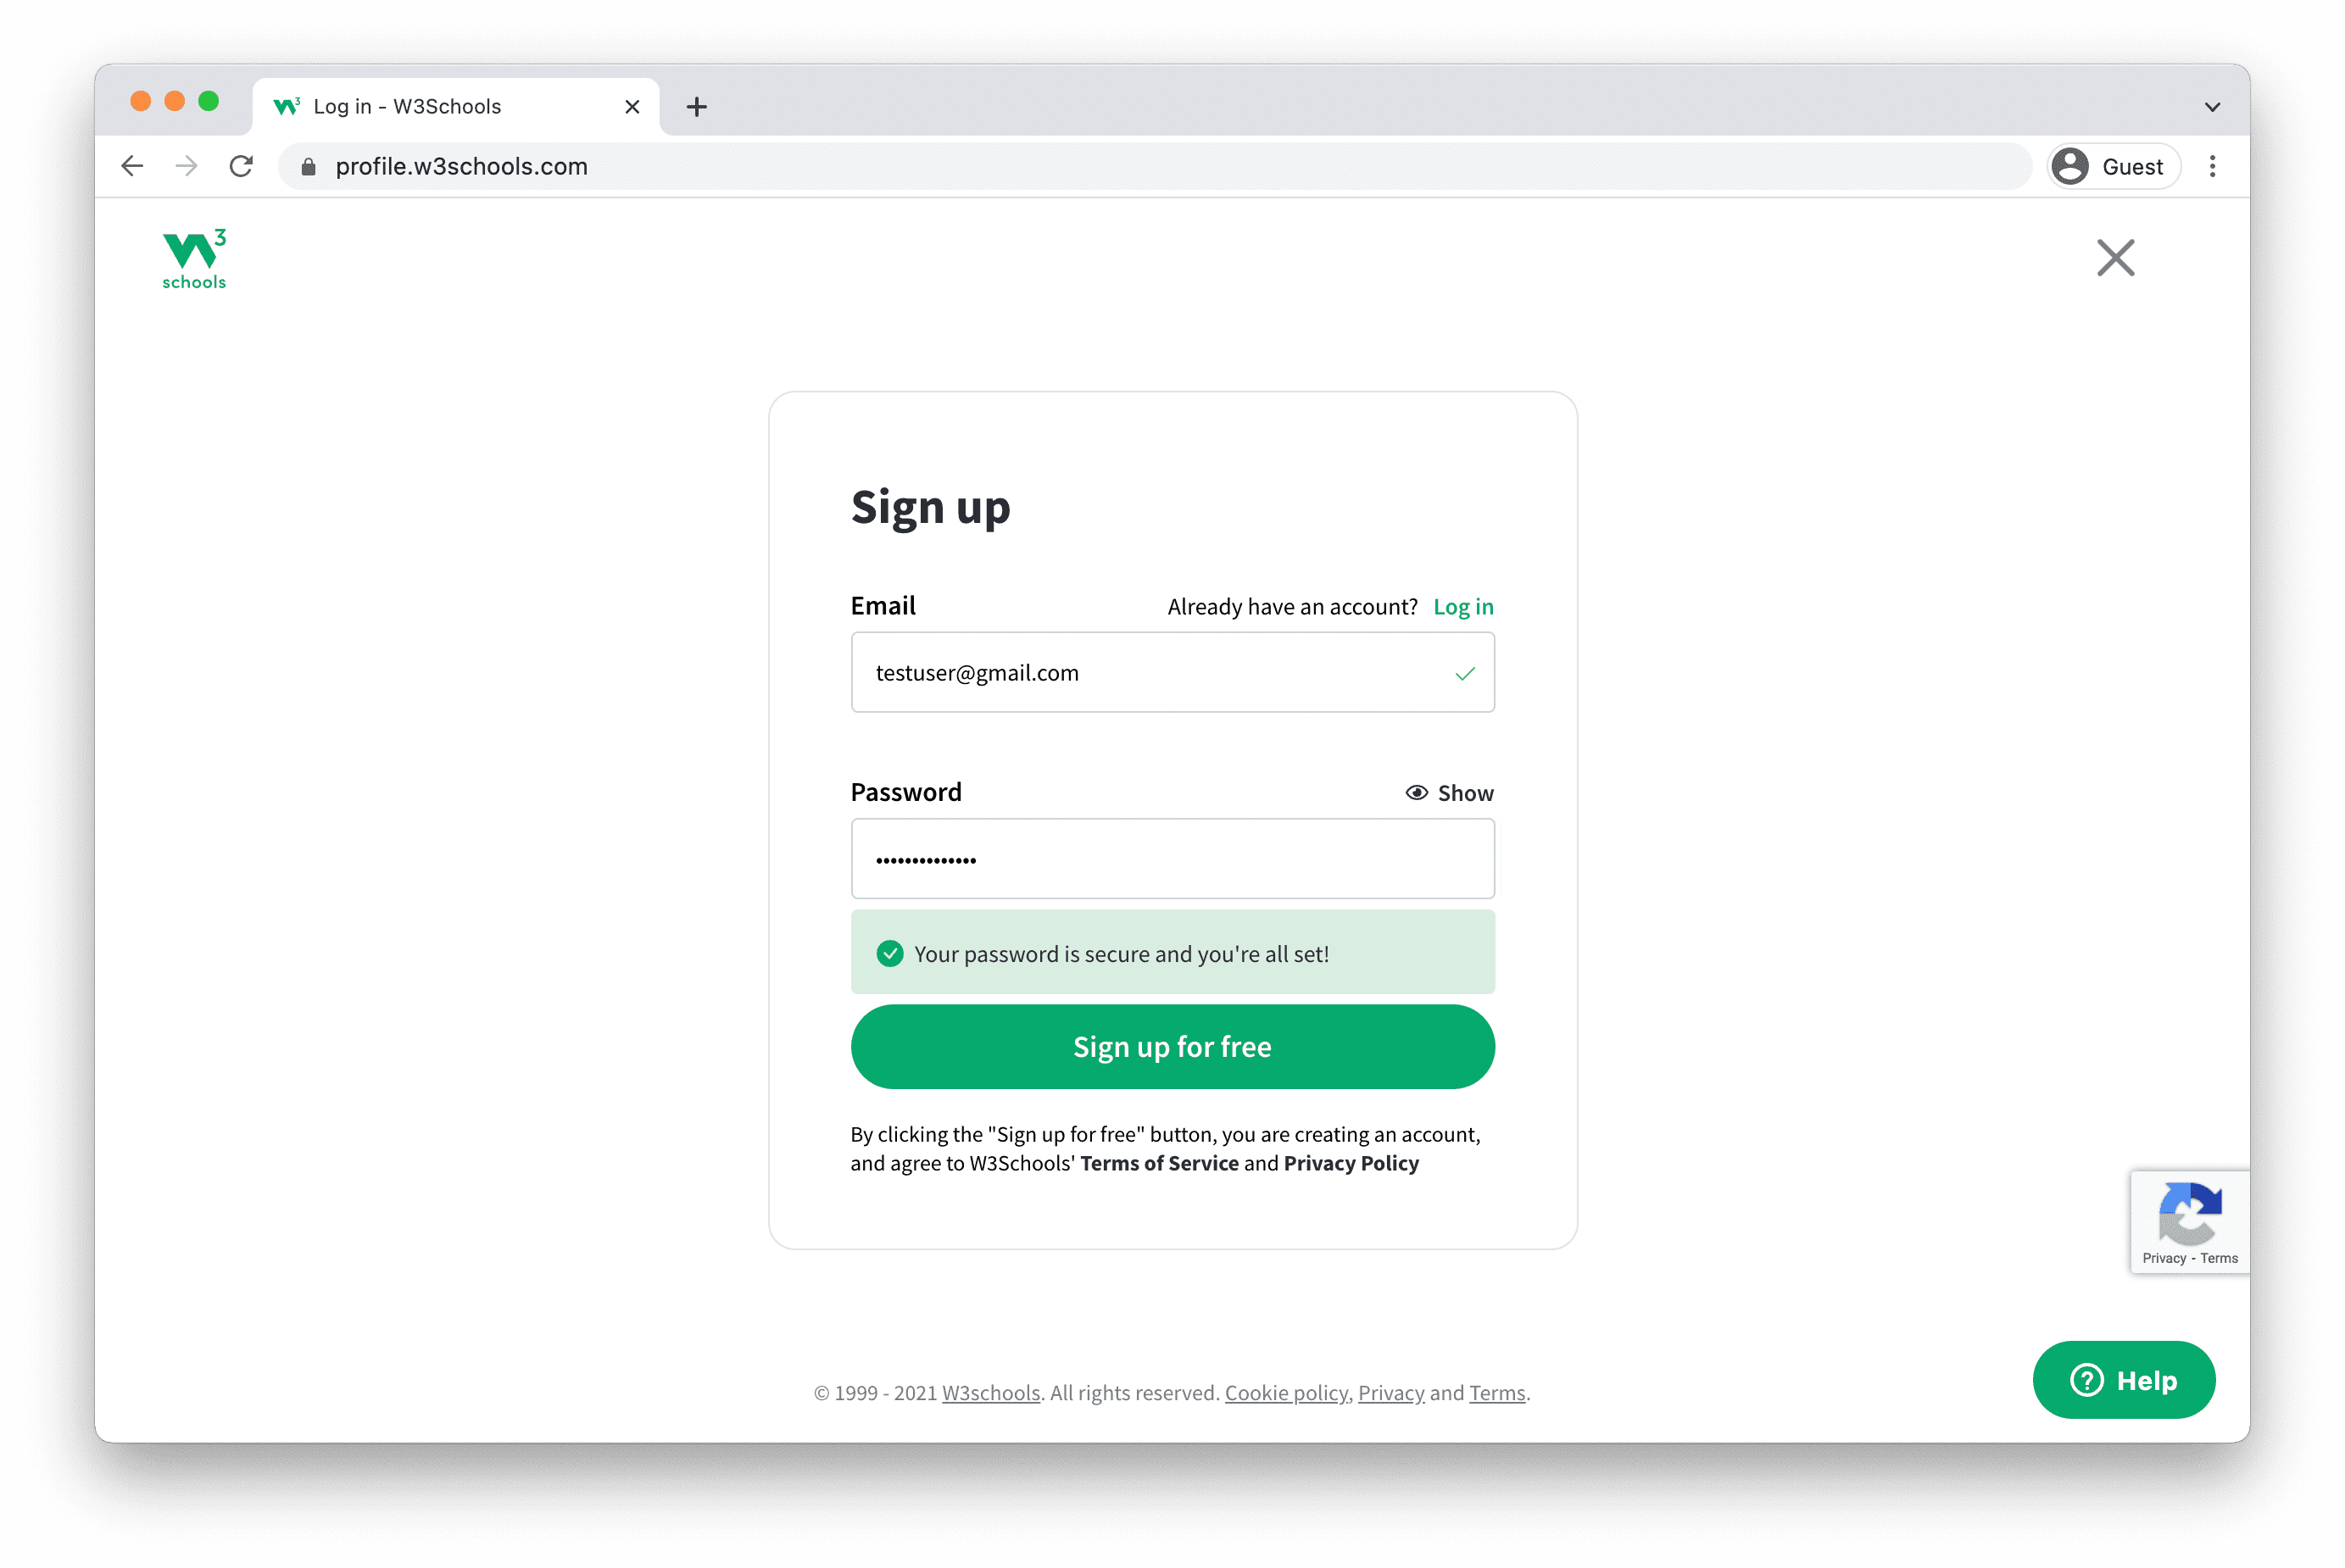 W3Spaces sign-up form image